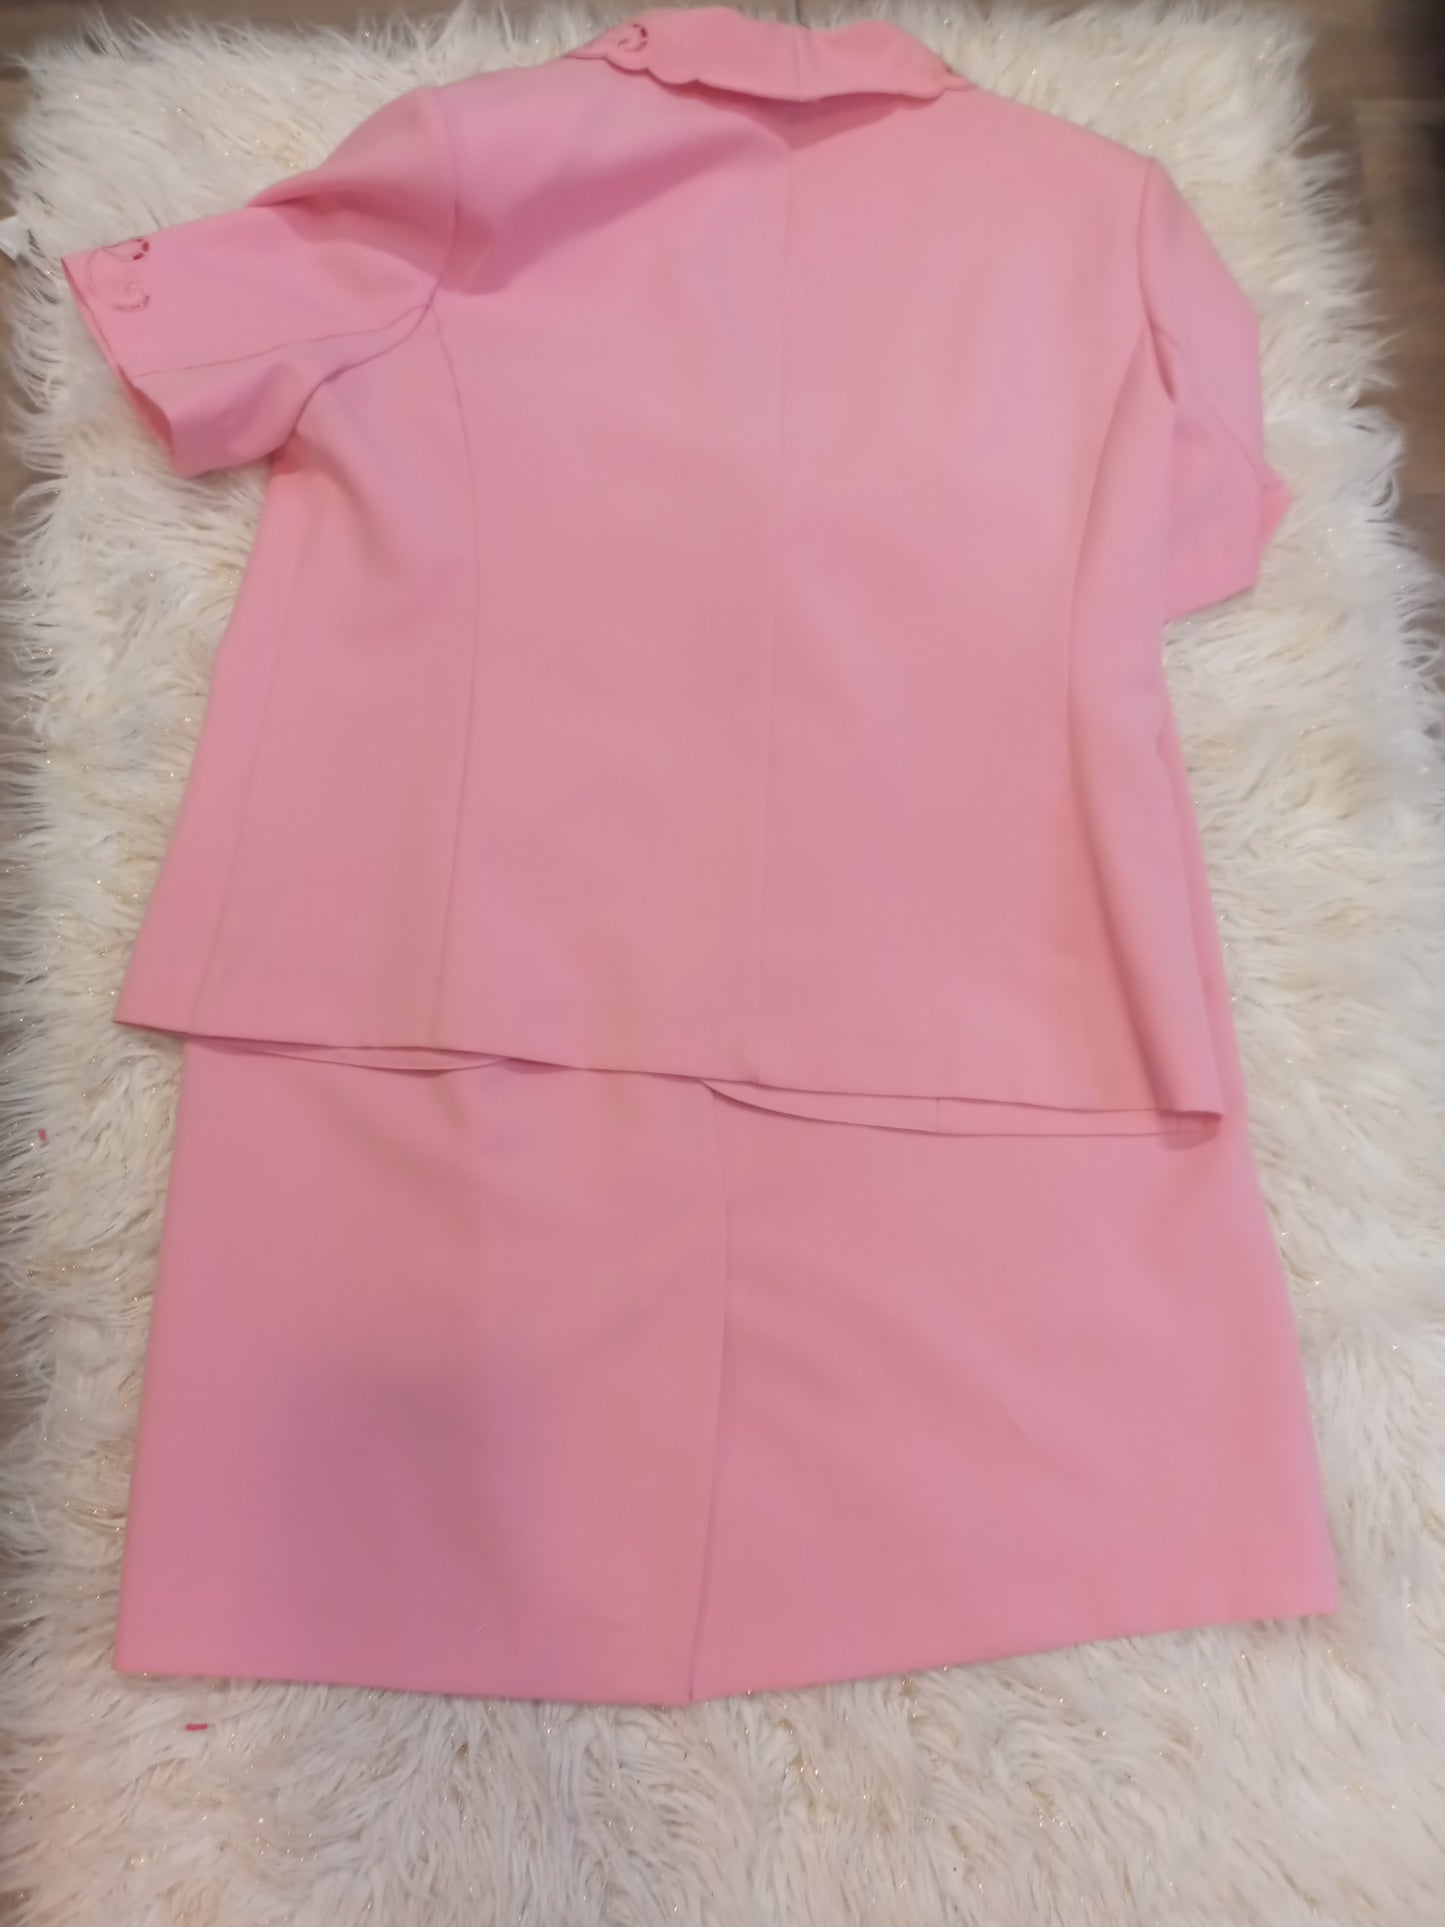 Woman 2Pc Jacket And Skirt Set Size 16 Color Pink/Peach By:Nikki (Shoes Sold Separately)